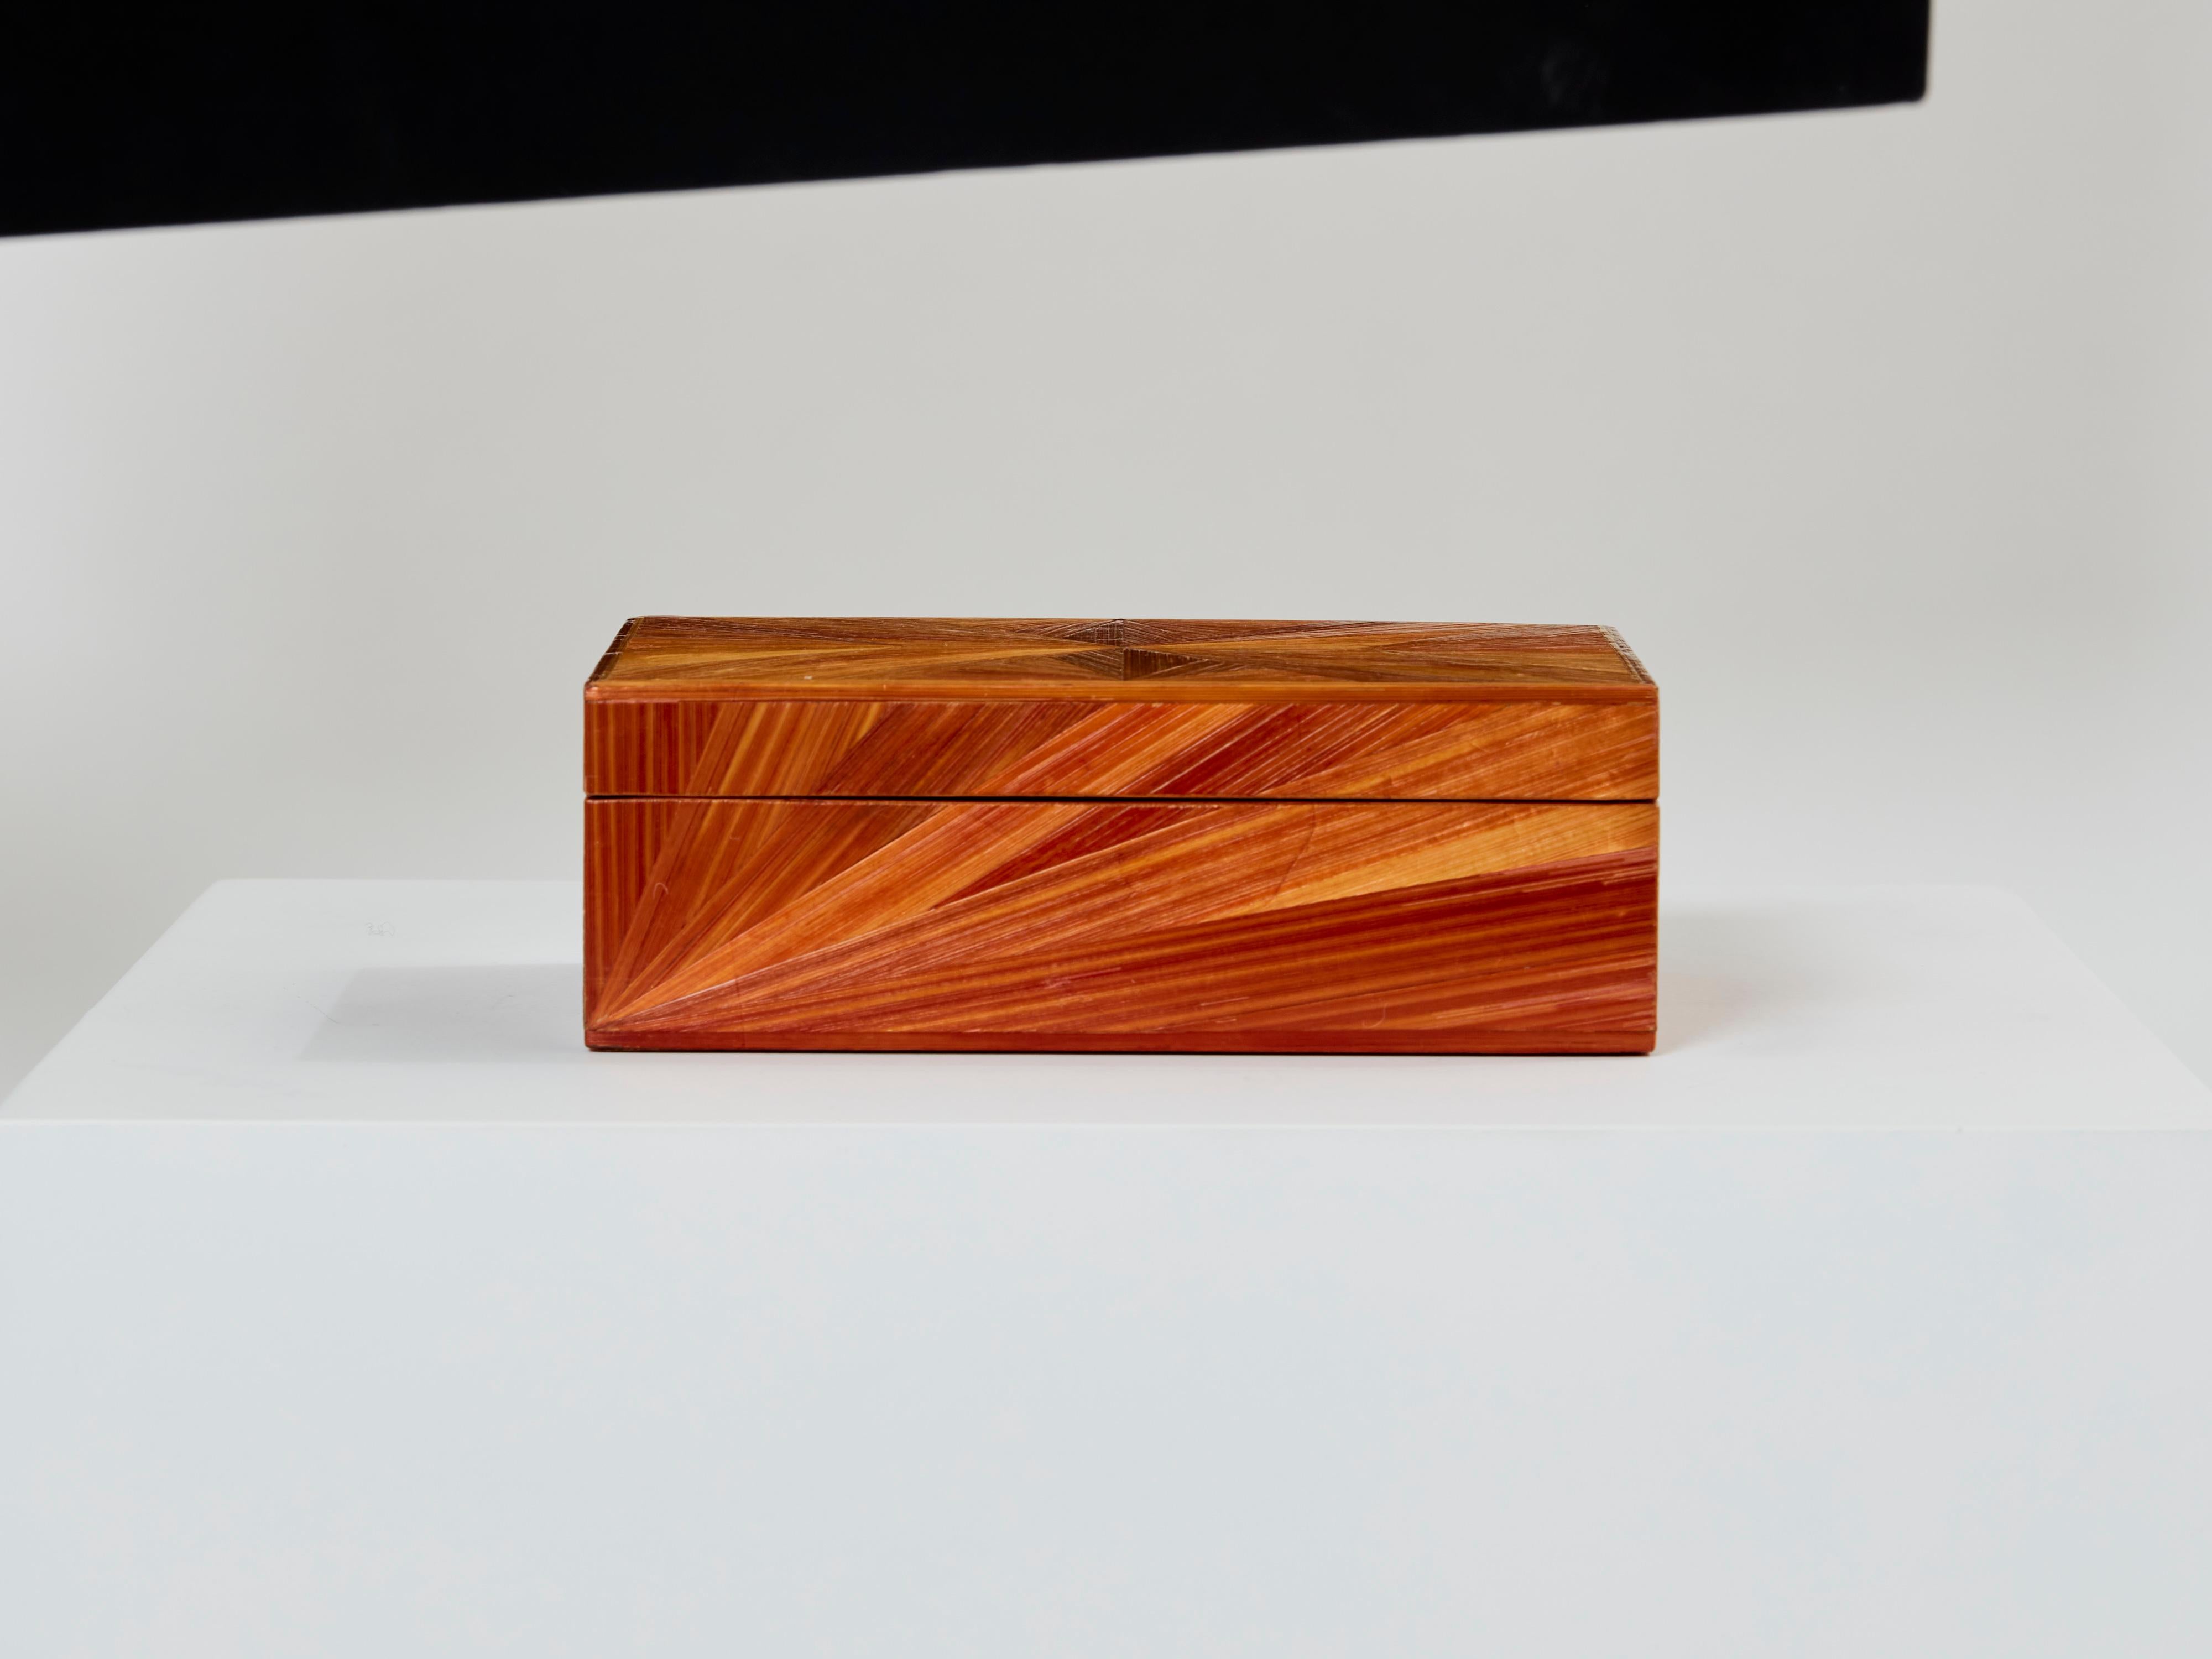 Jean-Michel Franck Straw Marquetry Box, 1930 For Sale 5